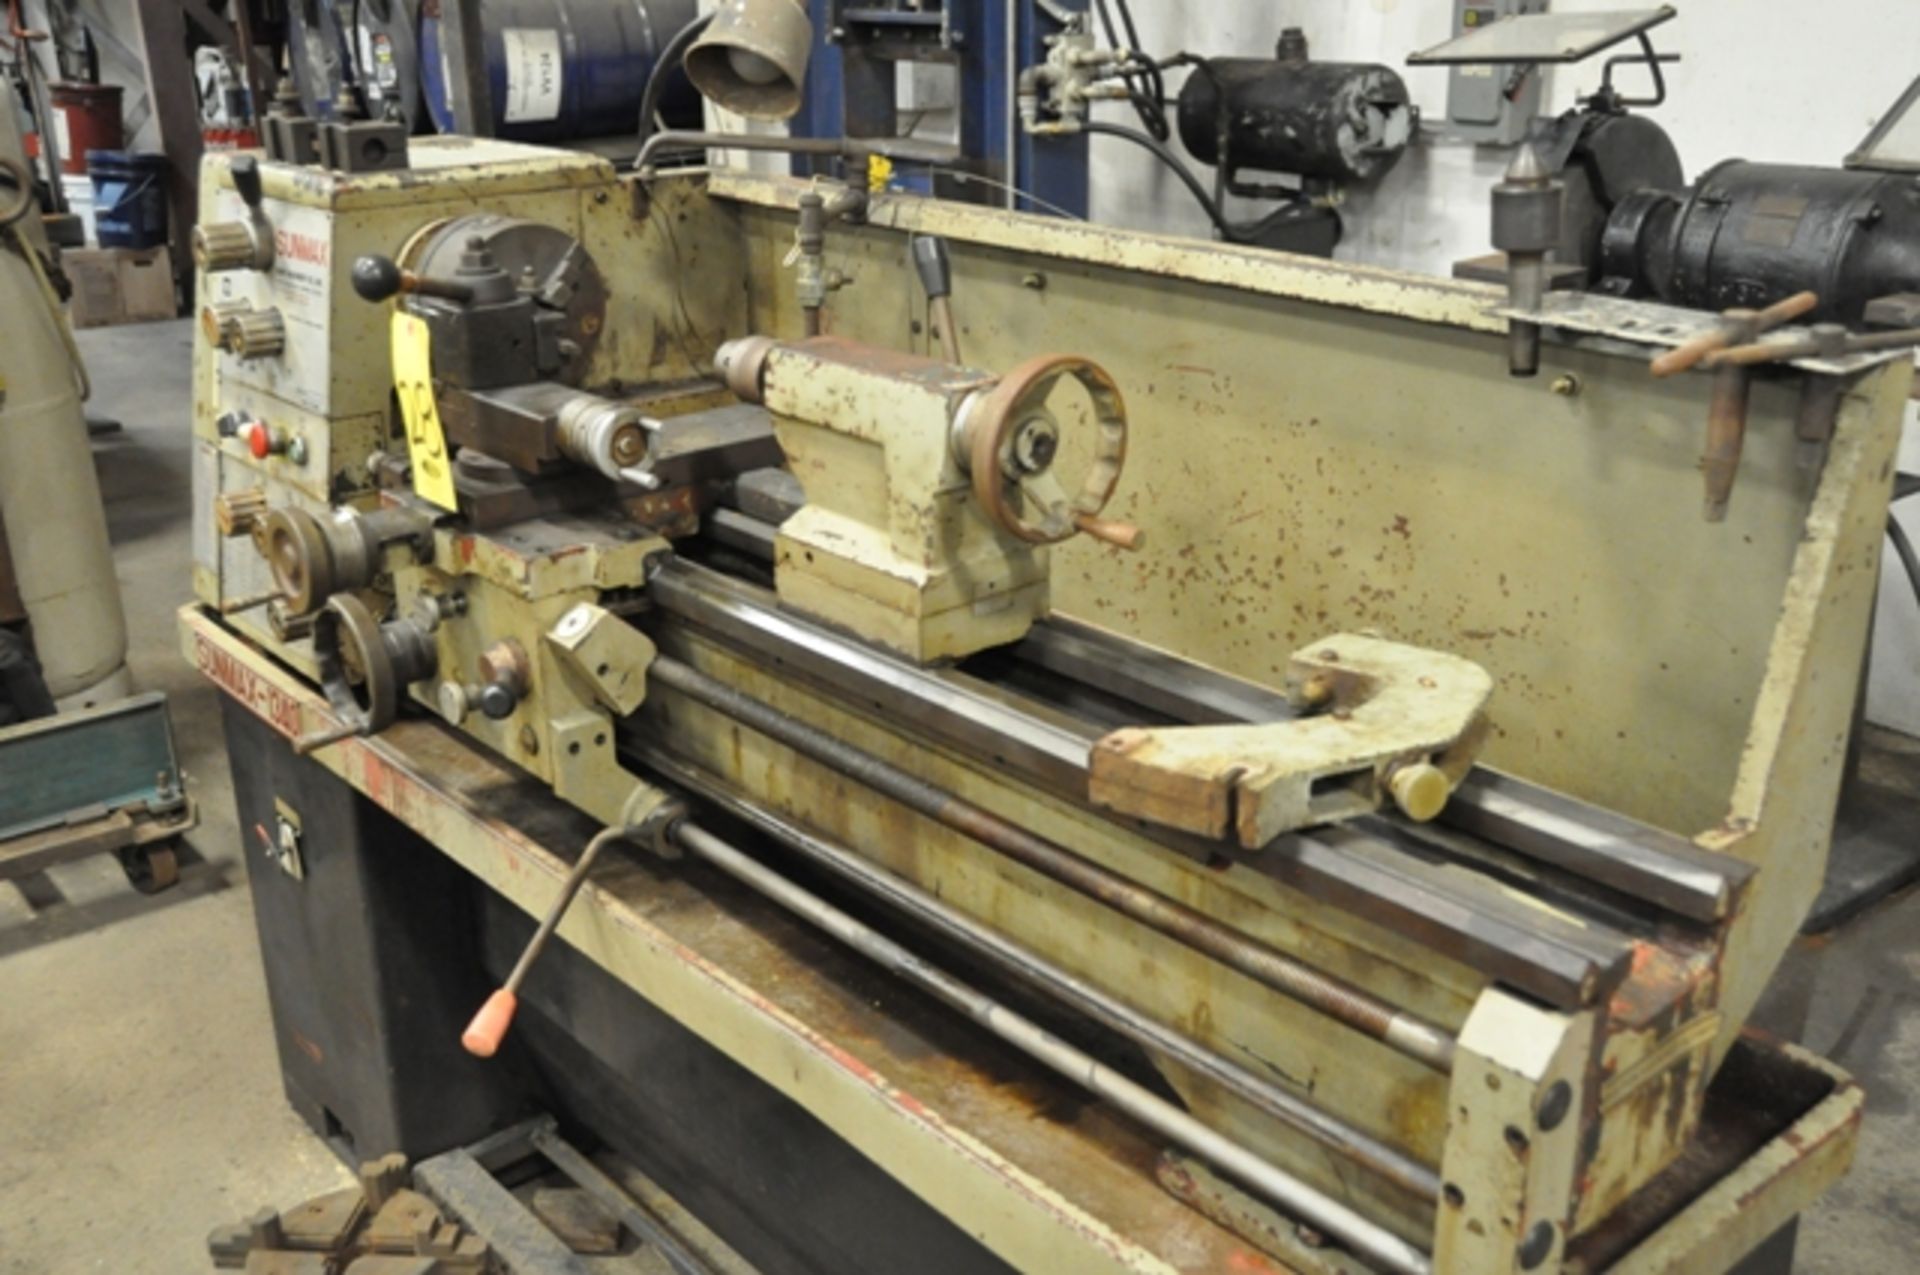 SUNMAX ENGINE LATHE 13" X 40", SN. 6795, NEW 1988, MODEL 1340, GAP BED, QUICK CHANGE TOOL POST - Image 3 of 4